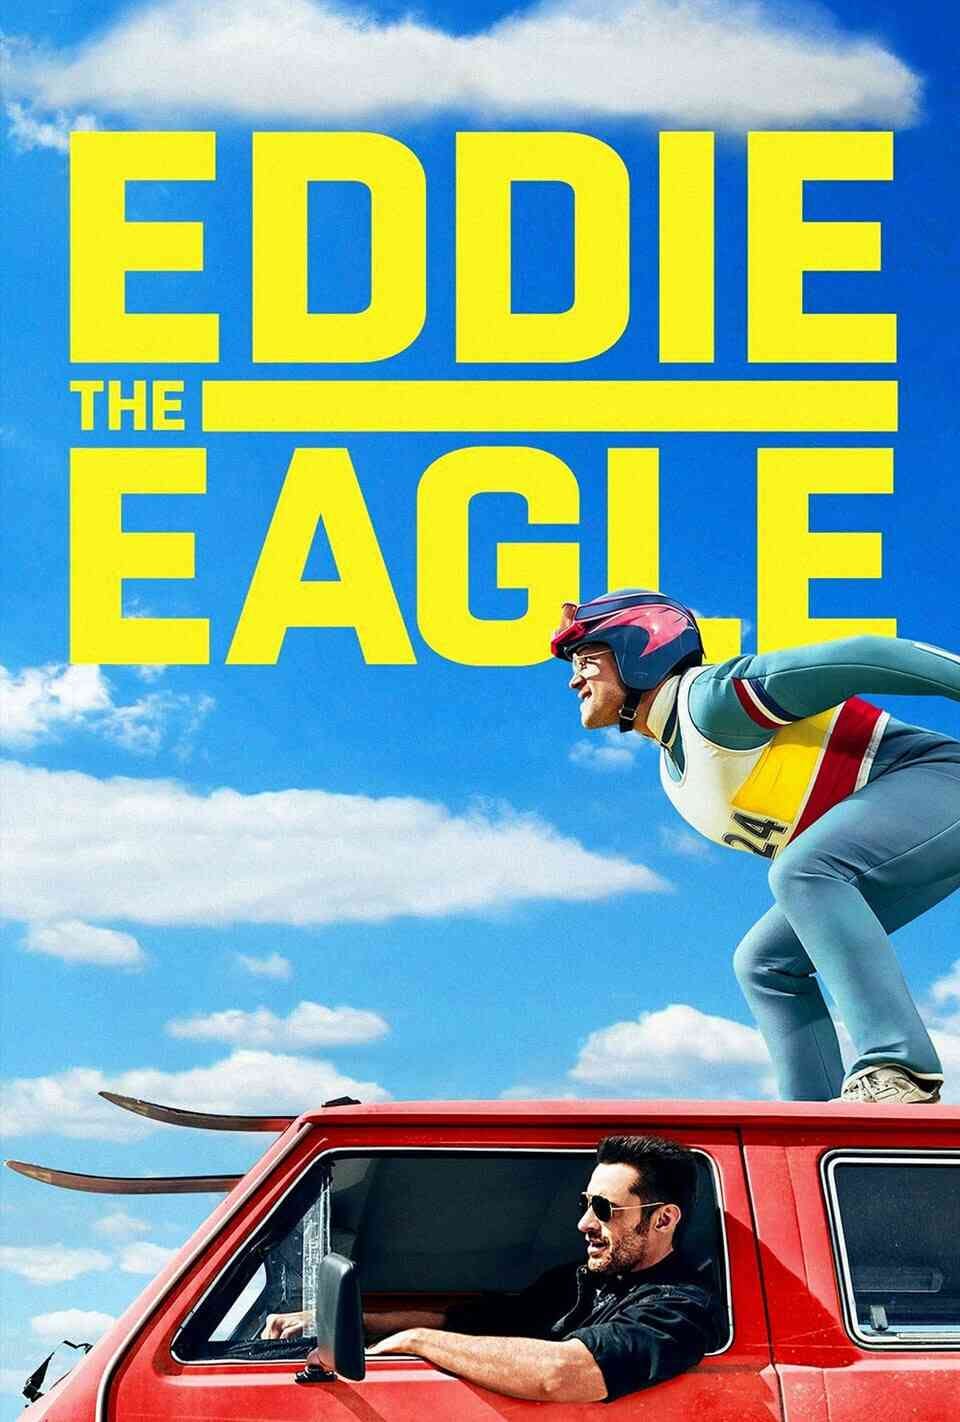 Read Eddie the Eagle screenplay (poster)